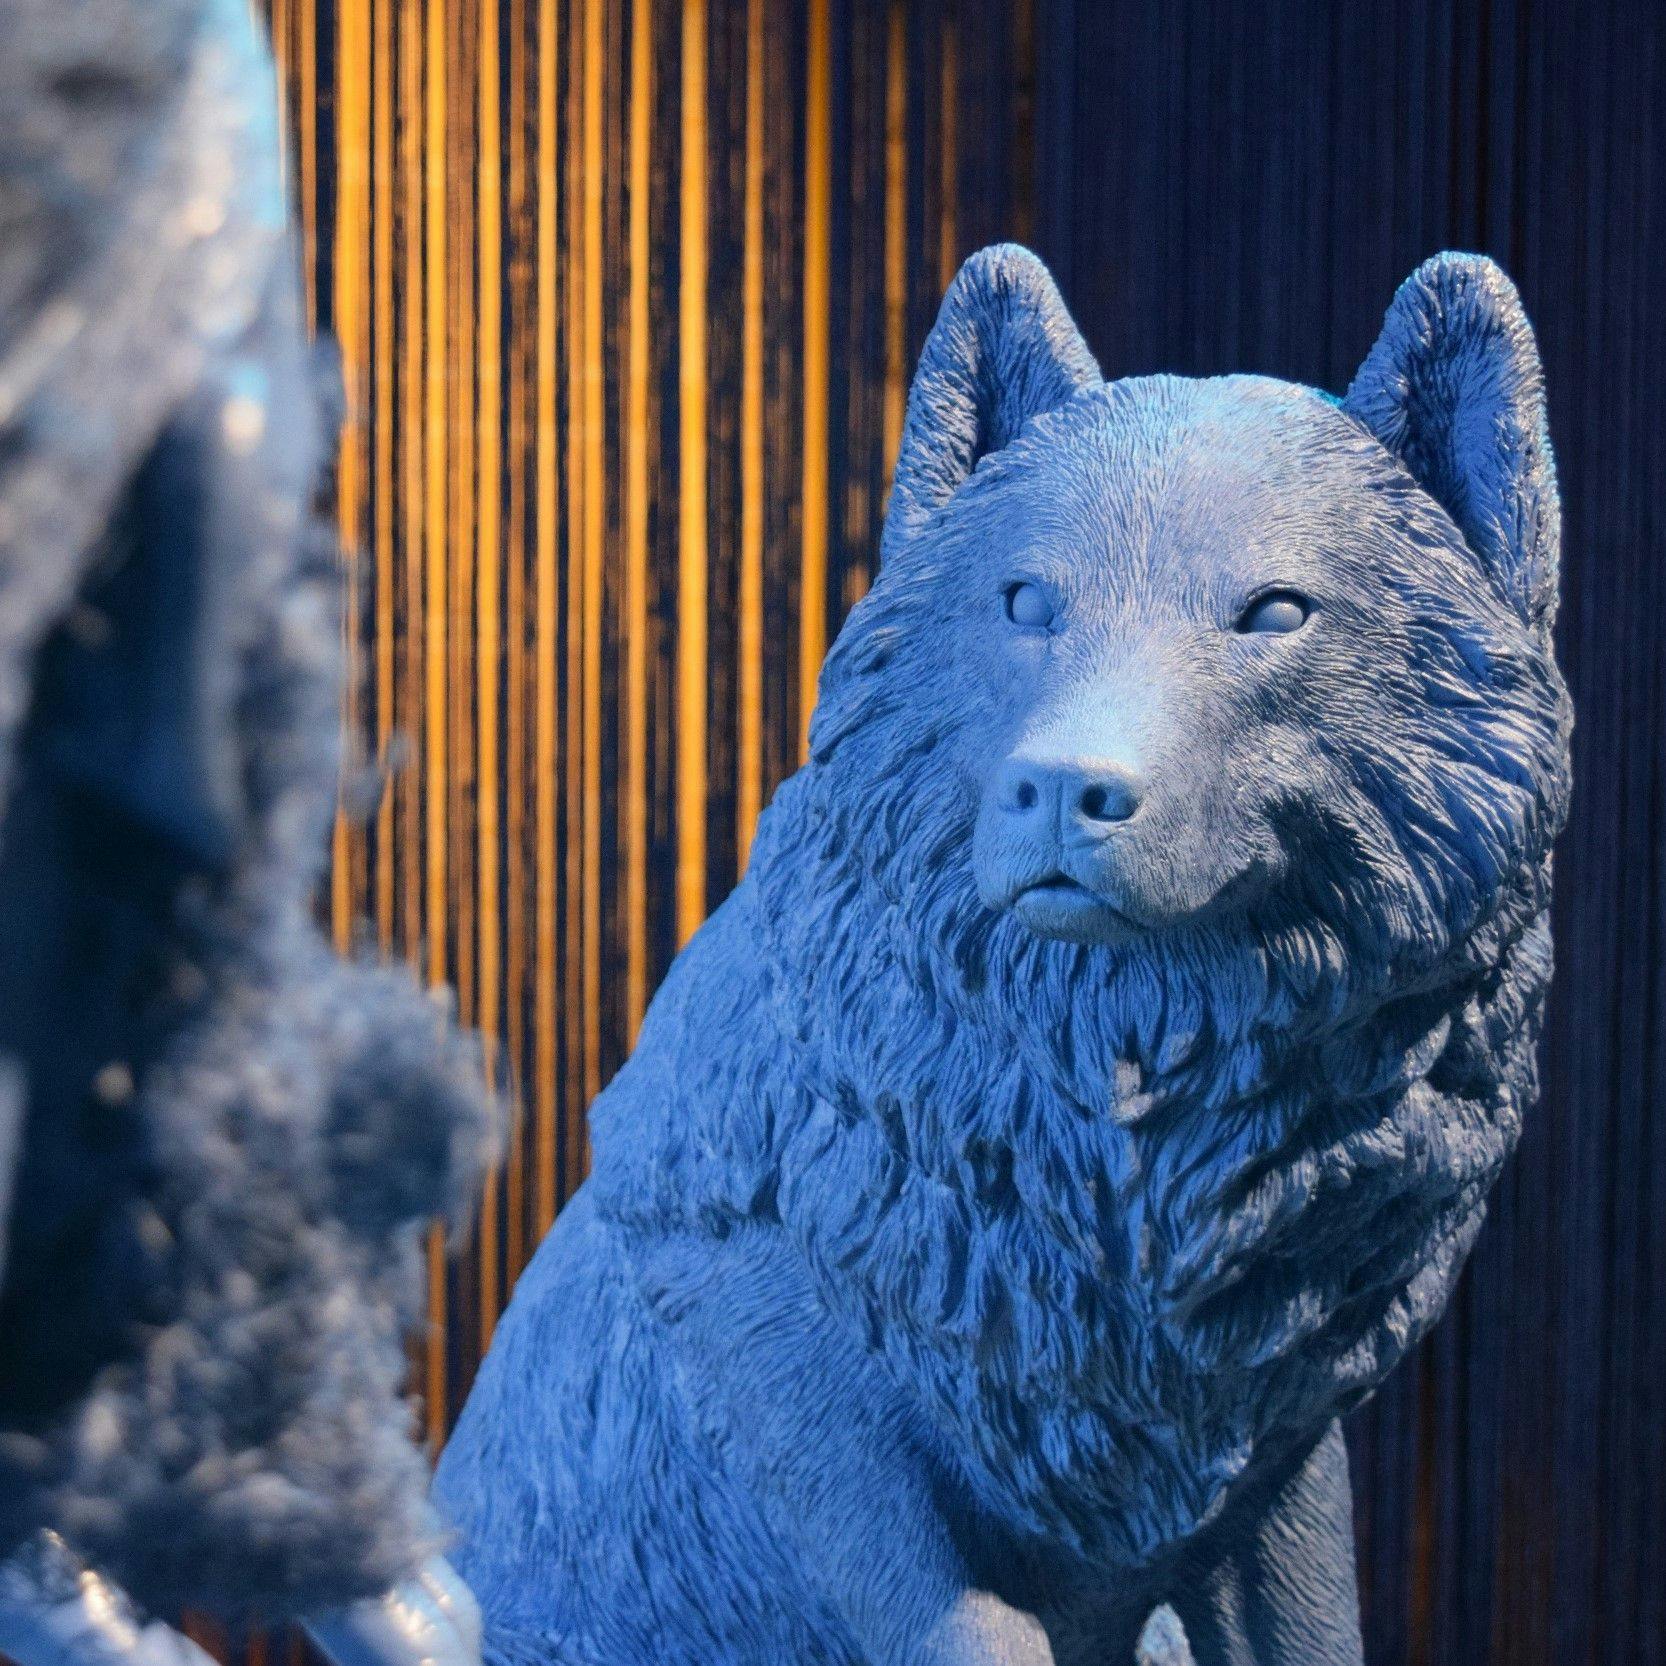 Blue, detailed model of a wolf looking towards a blue model of a human with a beard.